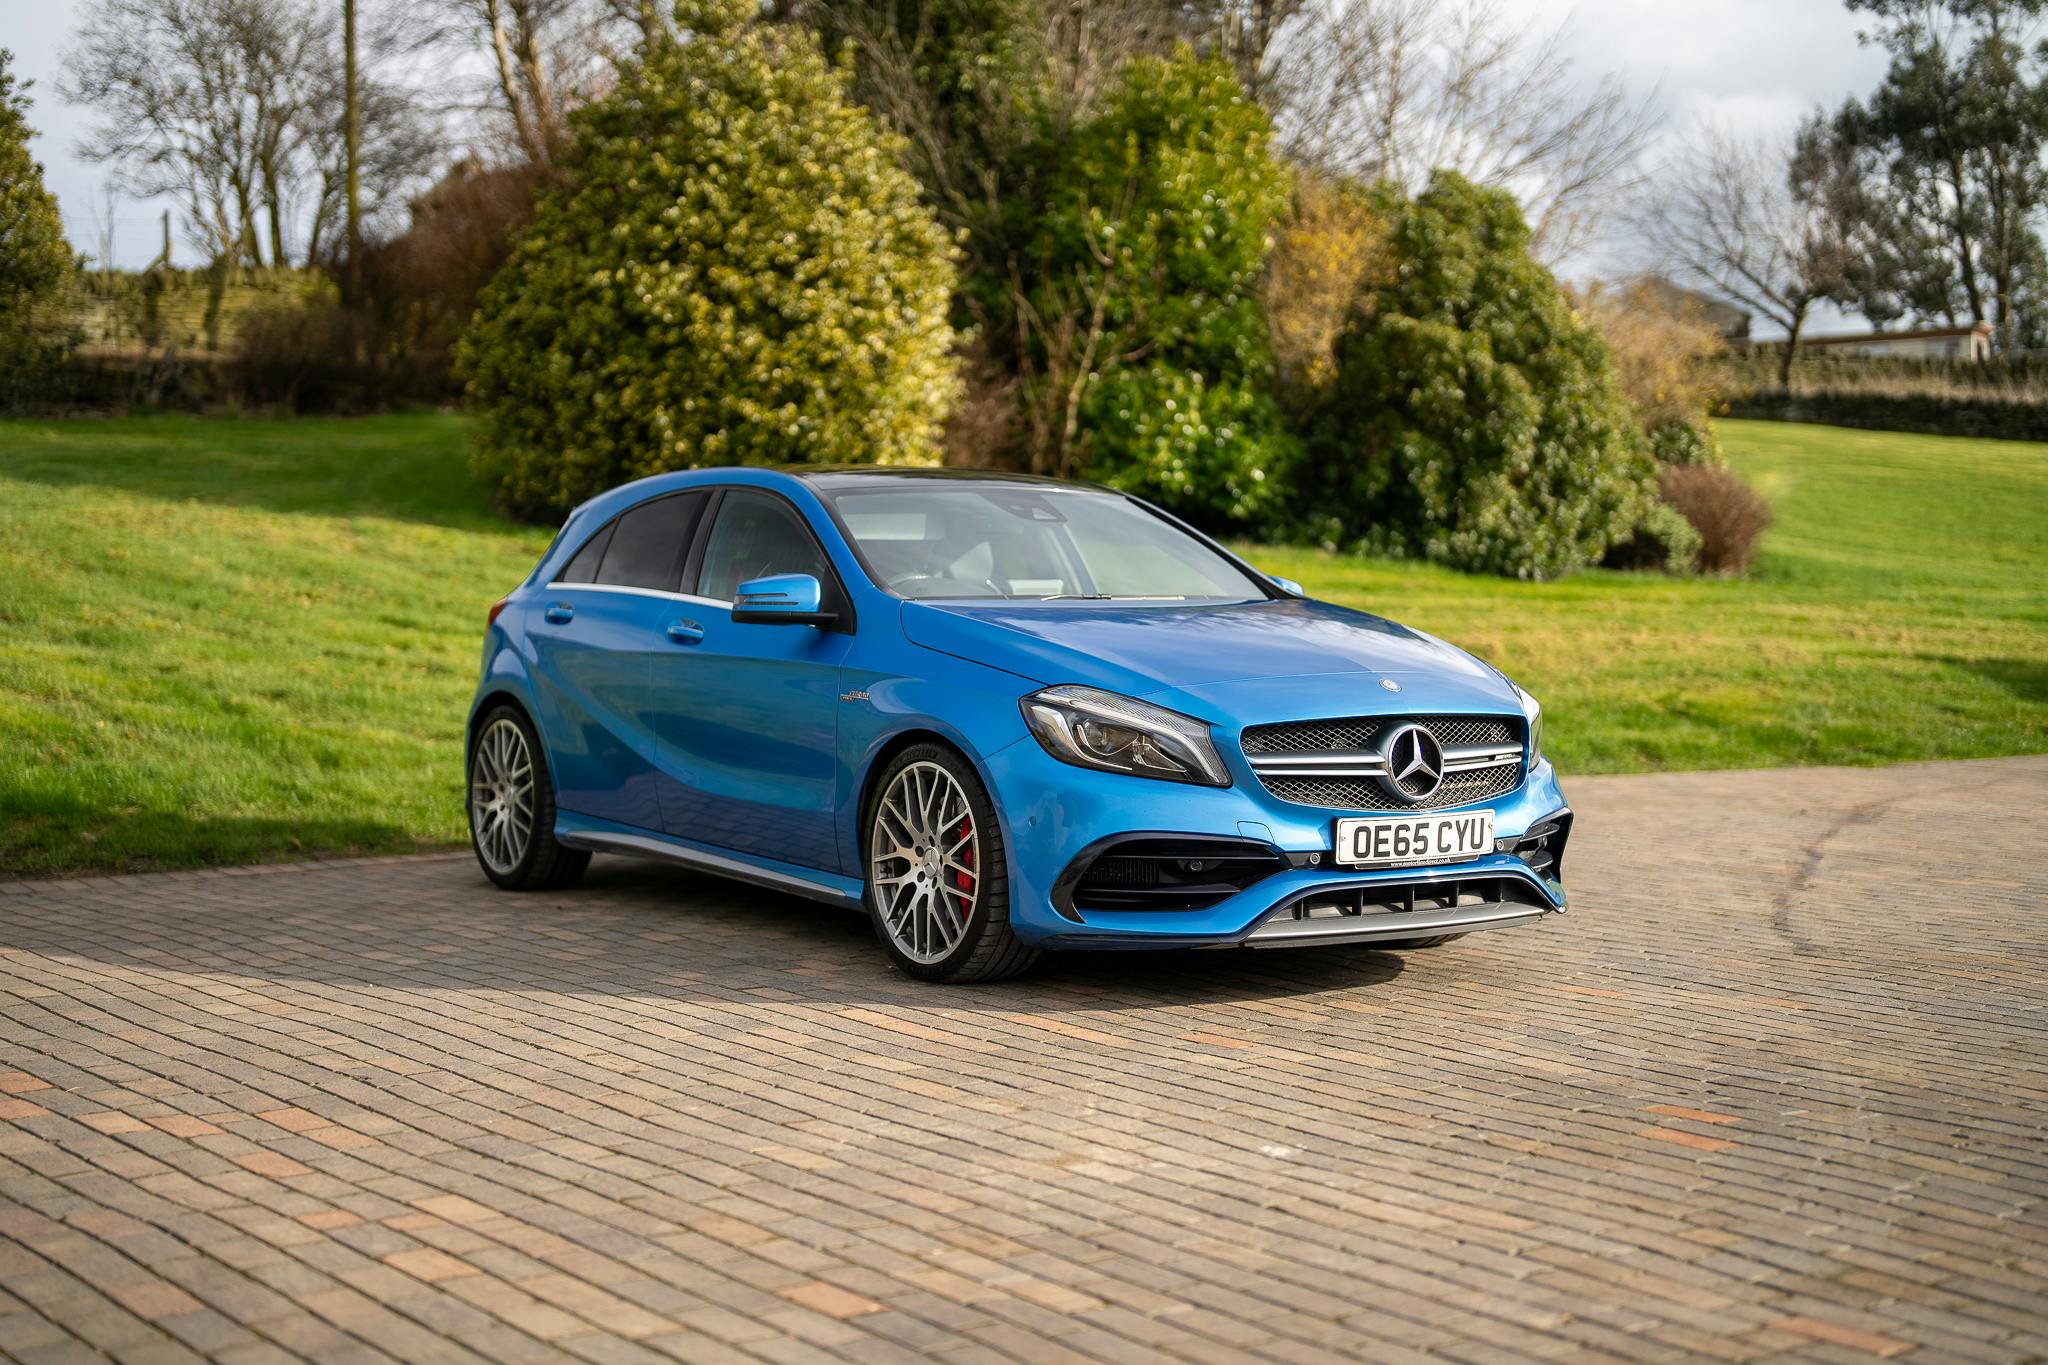 Cover Image for 2015 Mercedes-Benz A Class 2.0 A45 AMG